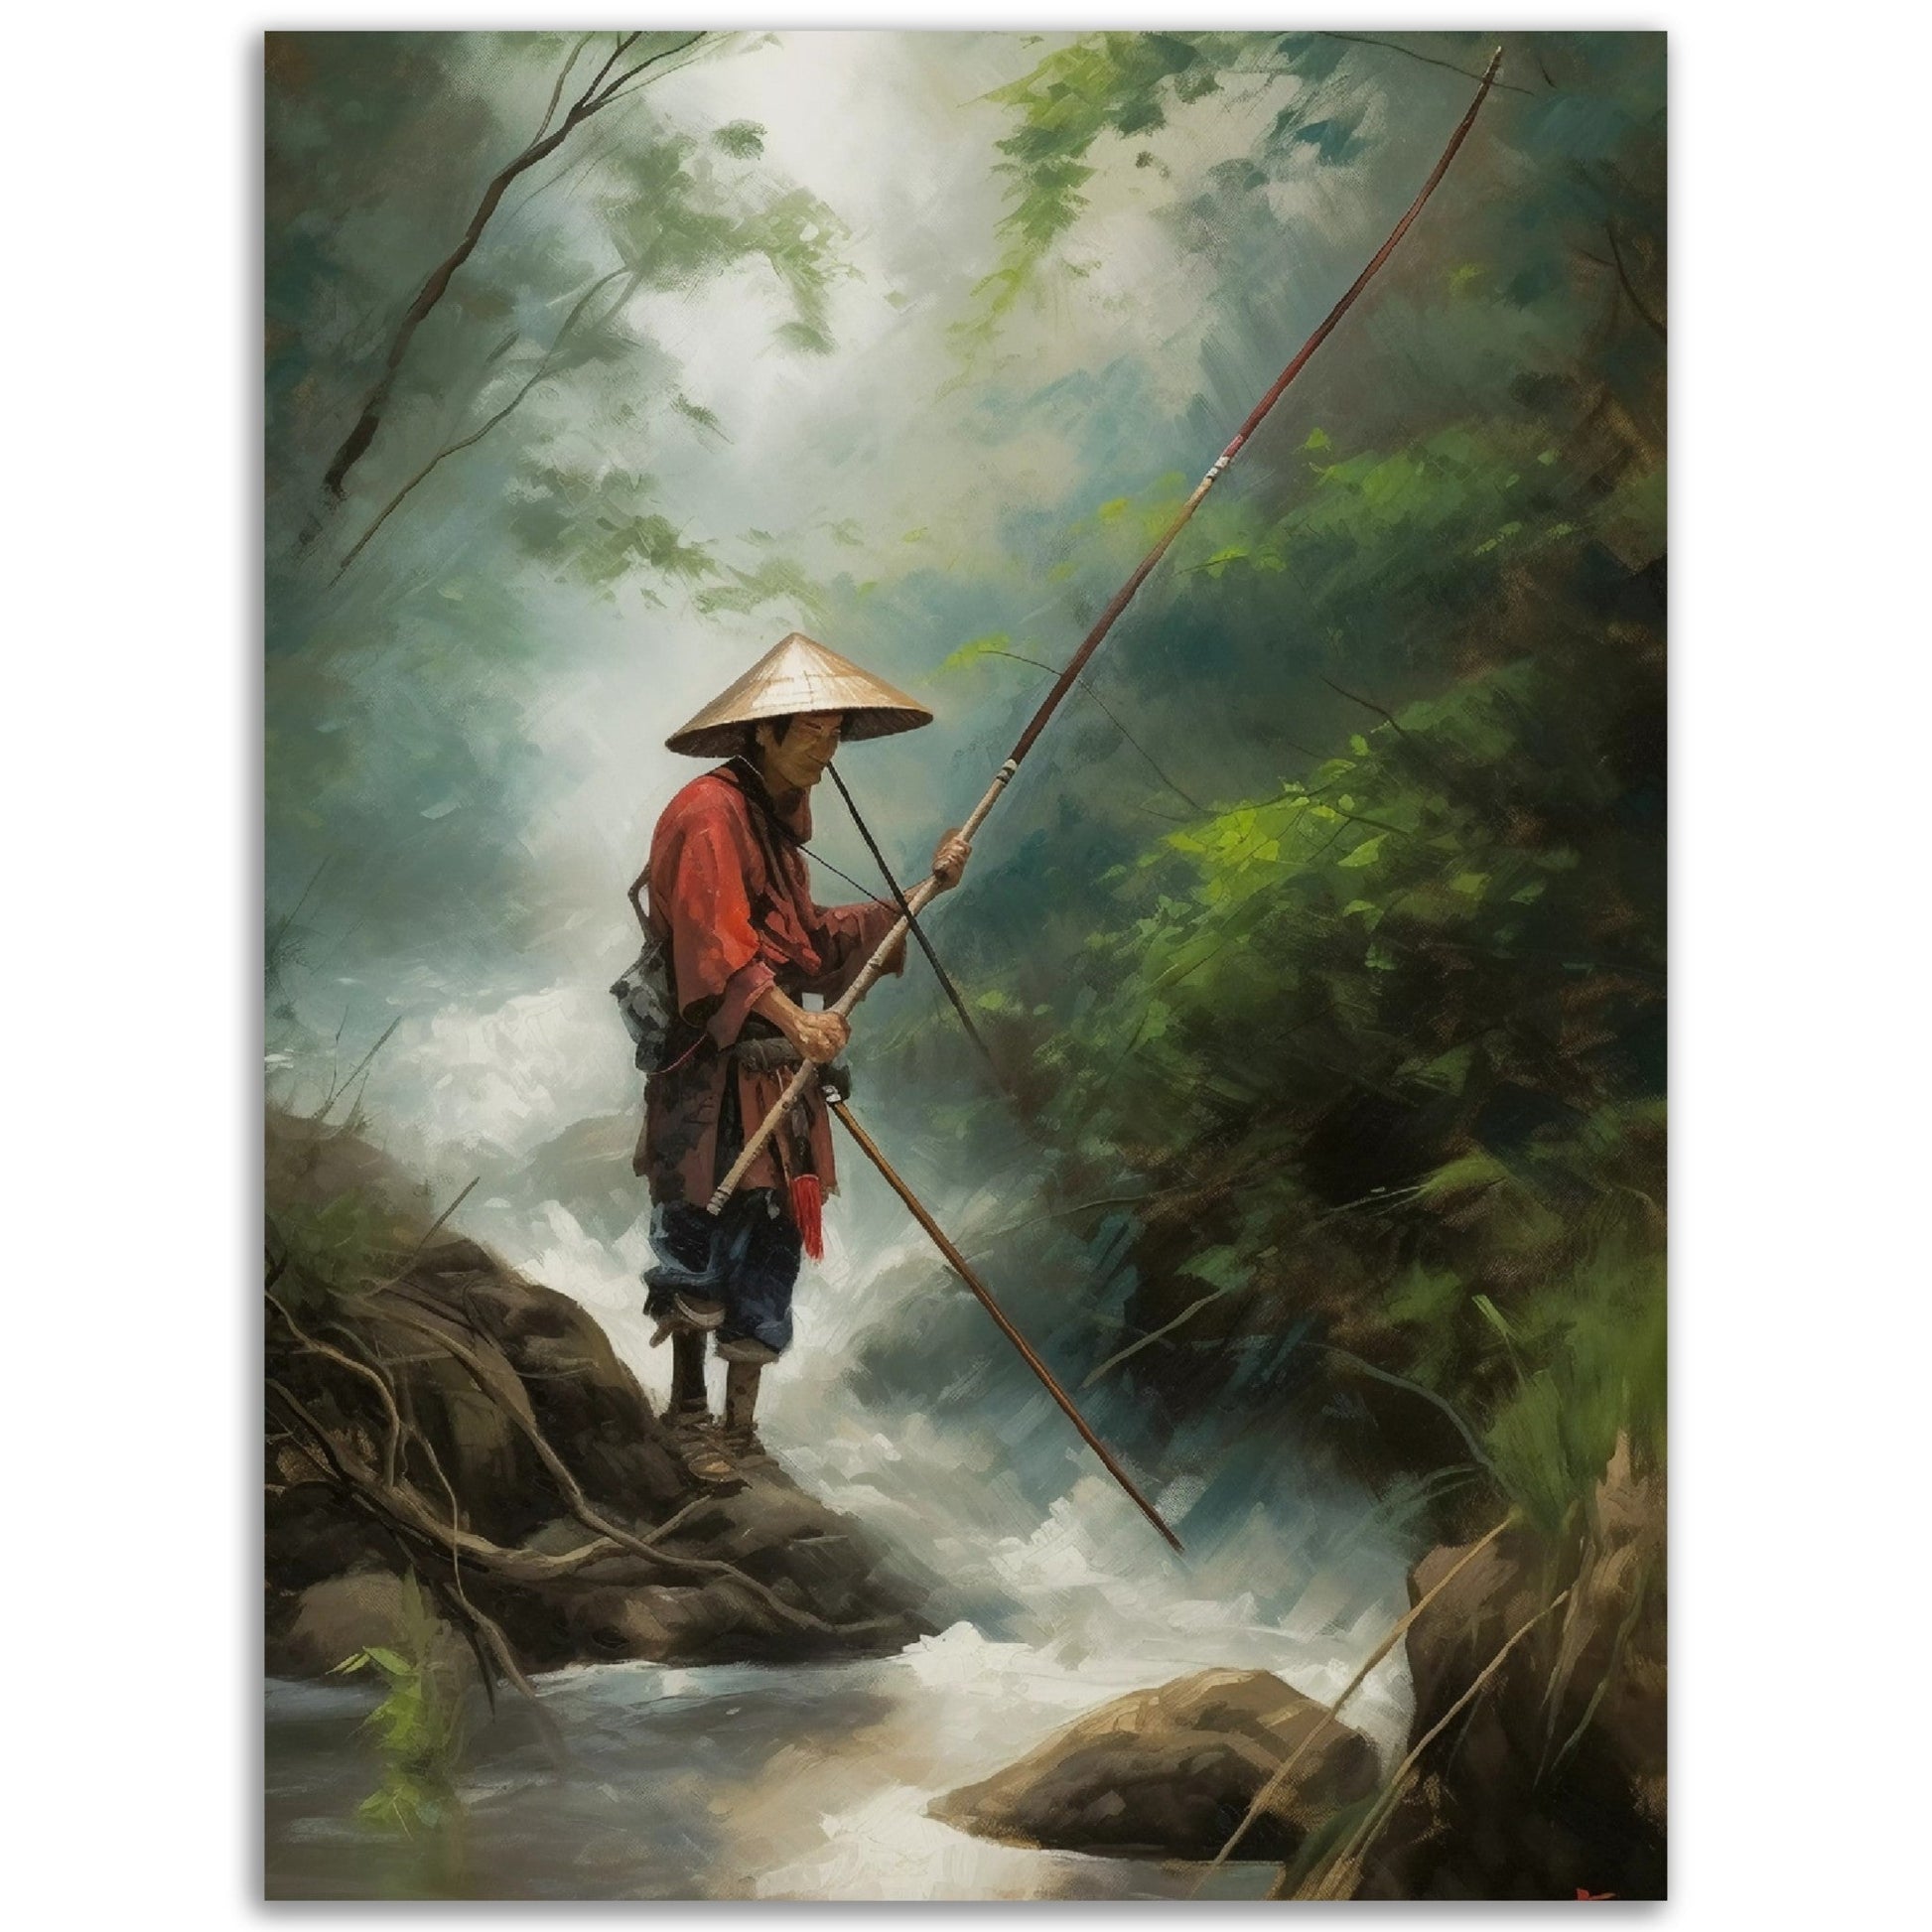 A high-quality poster of The Daily Catch, perfect for room decor or as wall art.